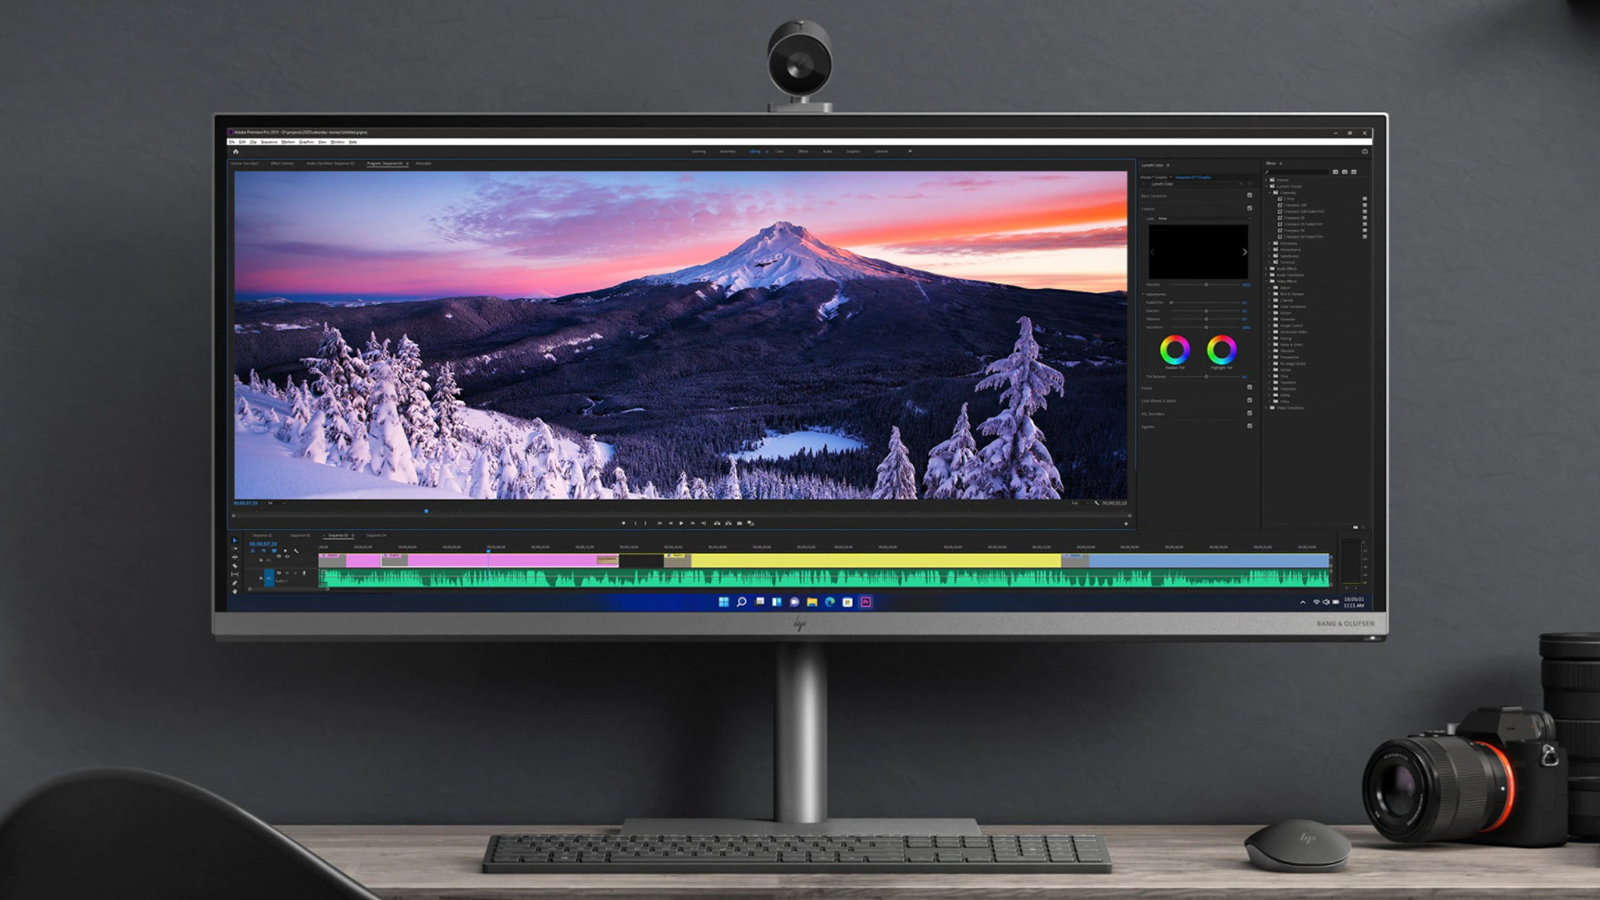 HP Envy 34 All-in-One PC